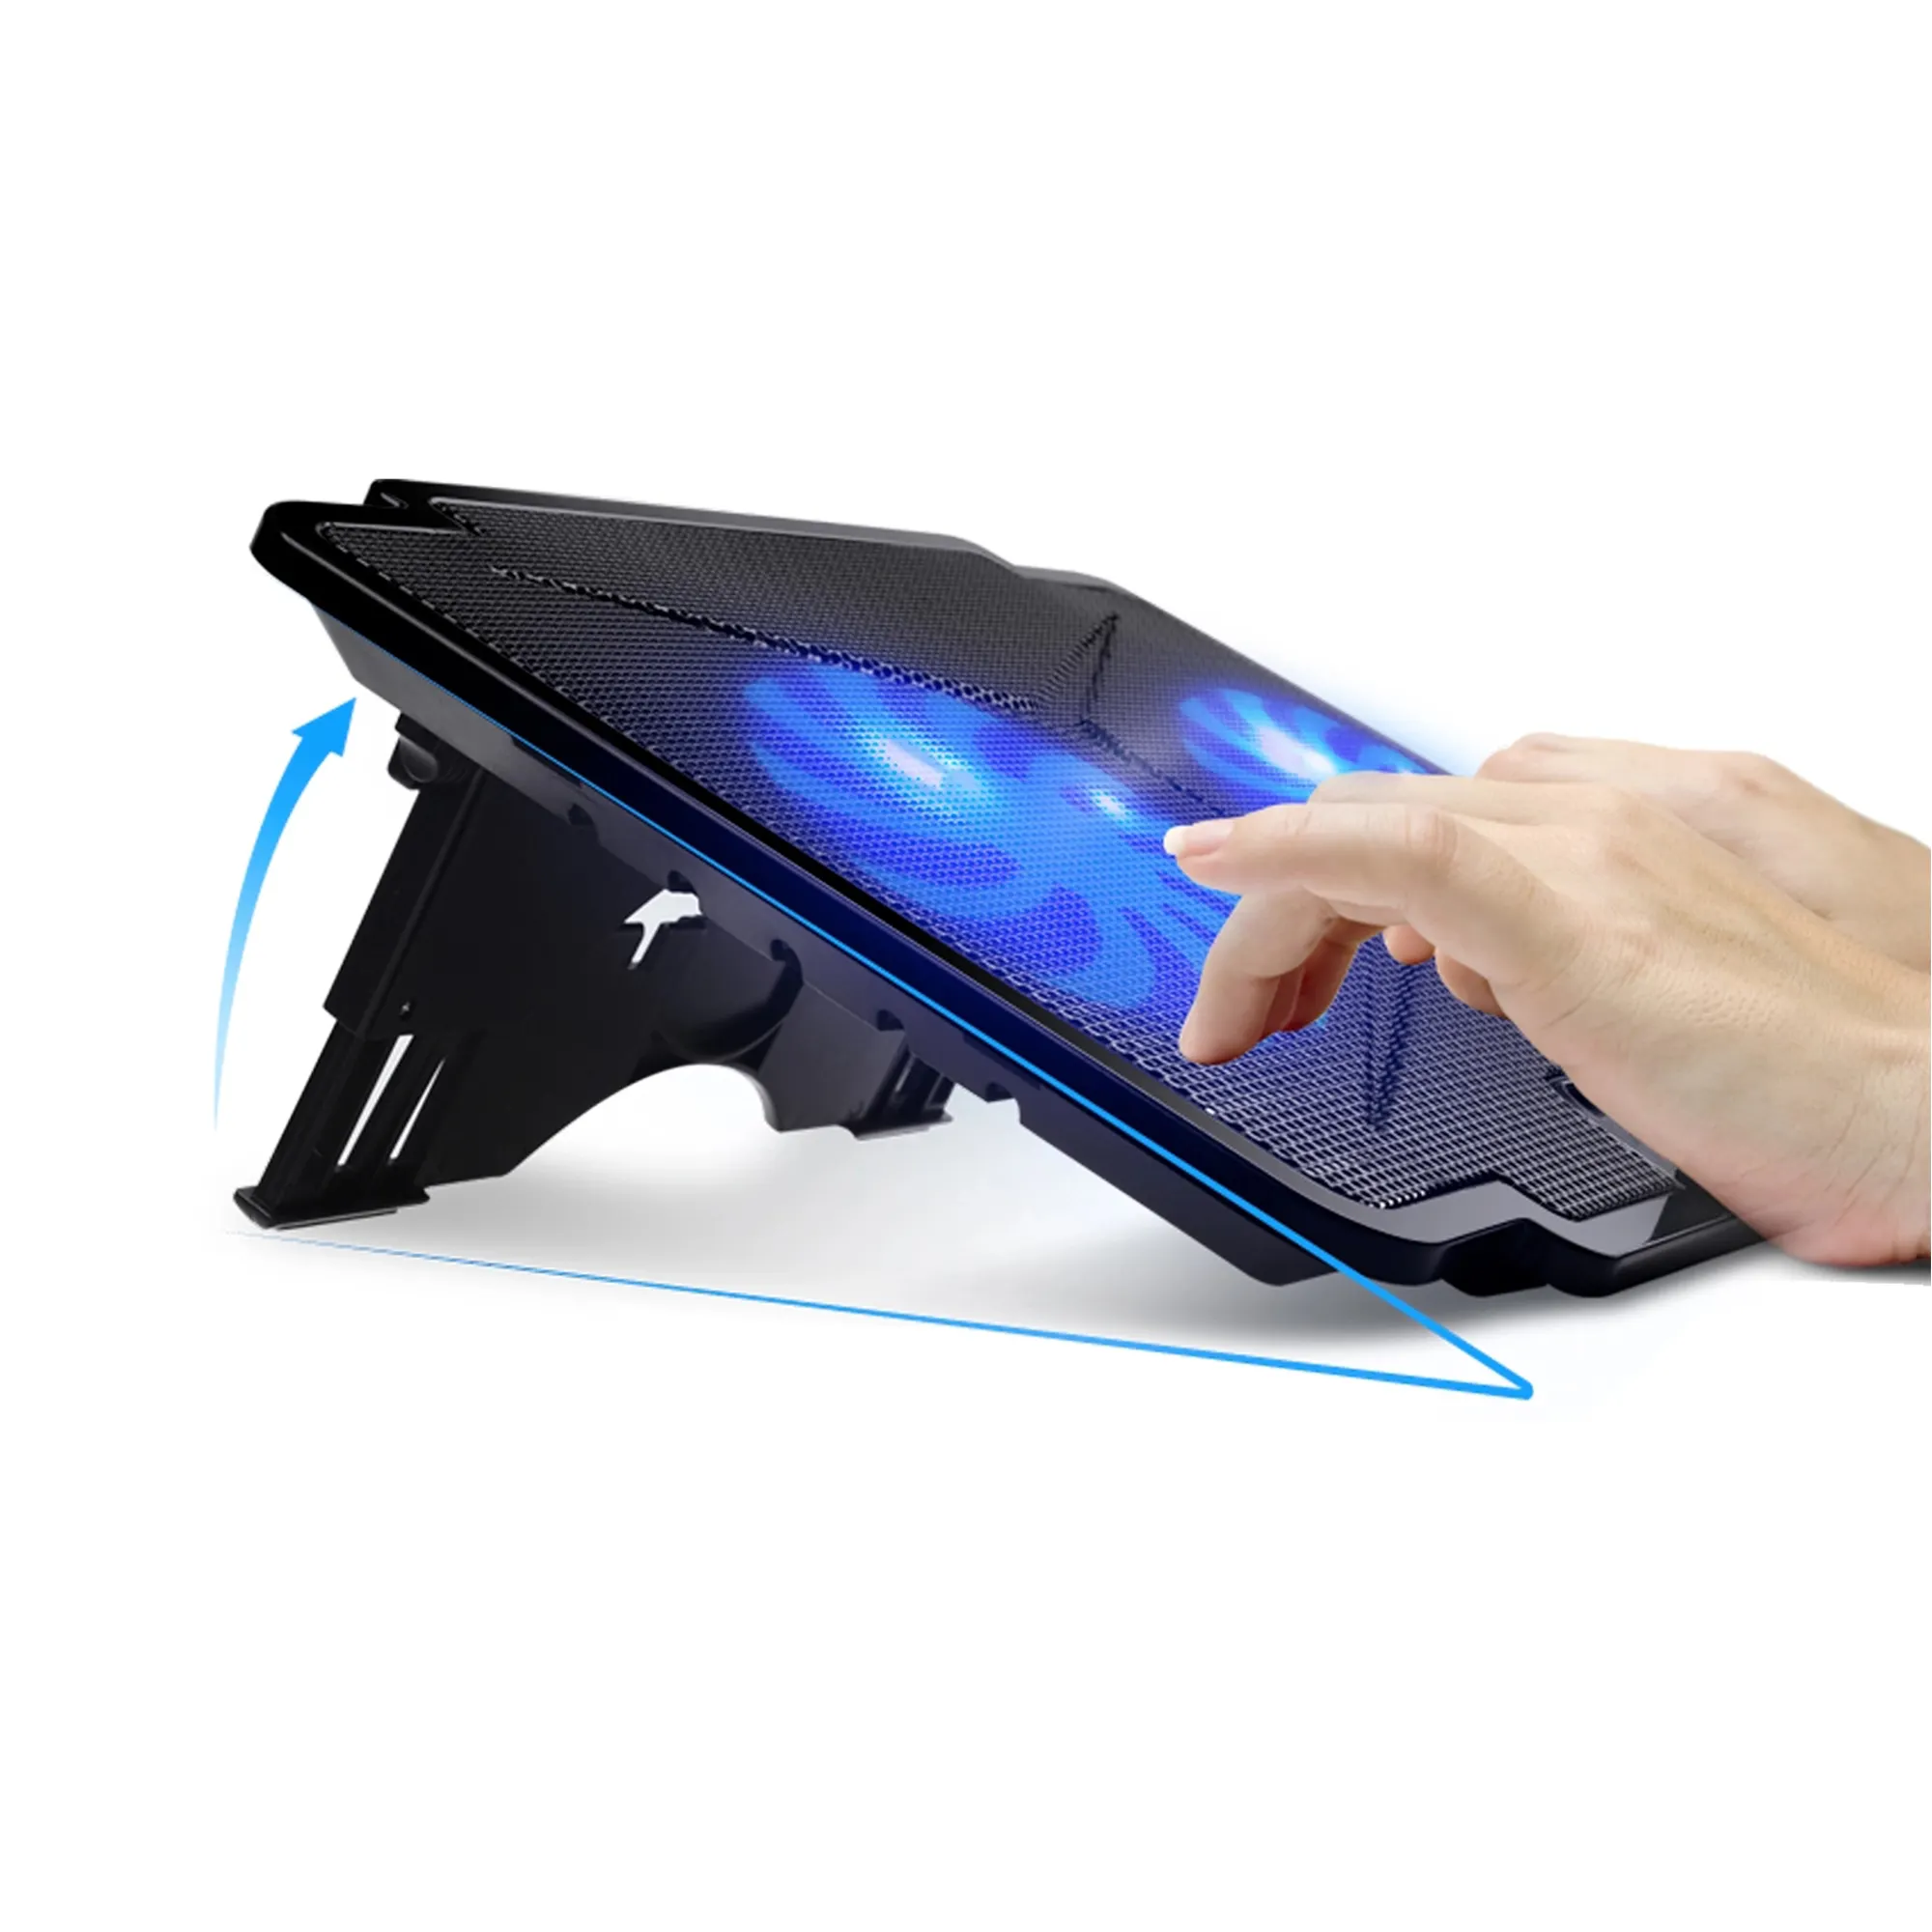 2021 New Version Laptop Cooling Pad Stable Gaming Laptop Cooler Stand Usb Notebook Base Cooler For Laptop With 2 Silent Big Fans